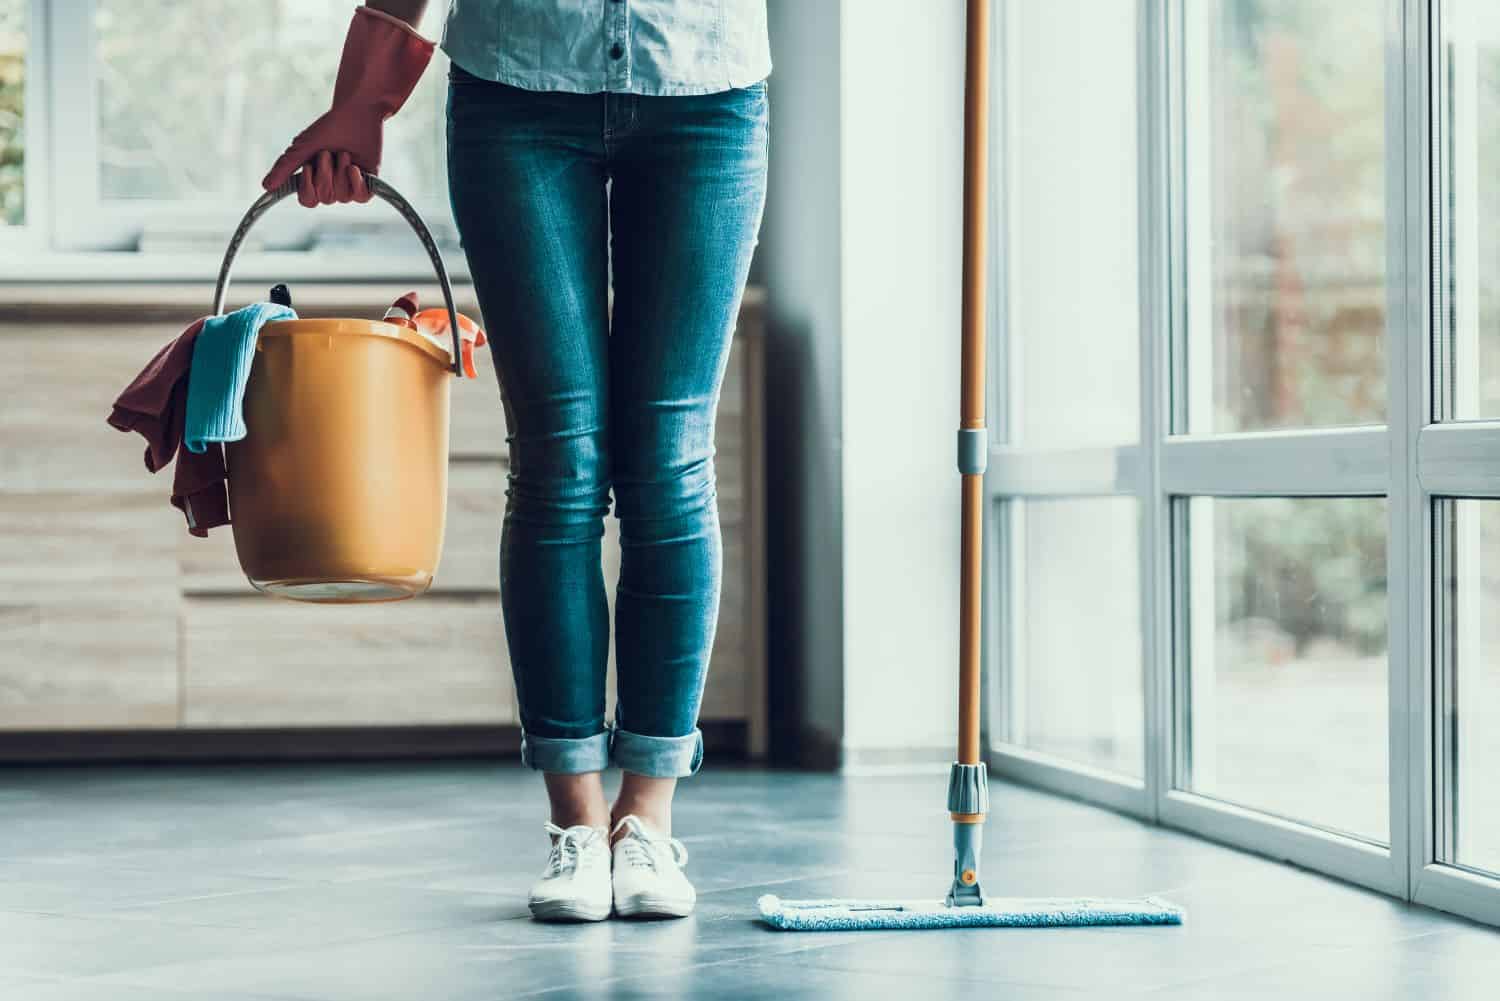 House Cleaning Tips to Reduce Allergies